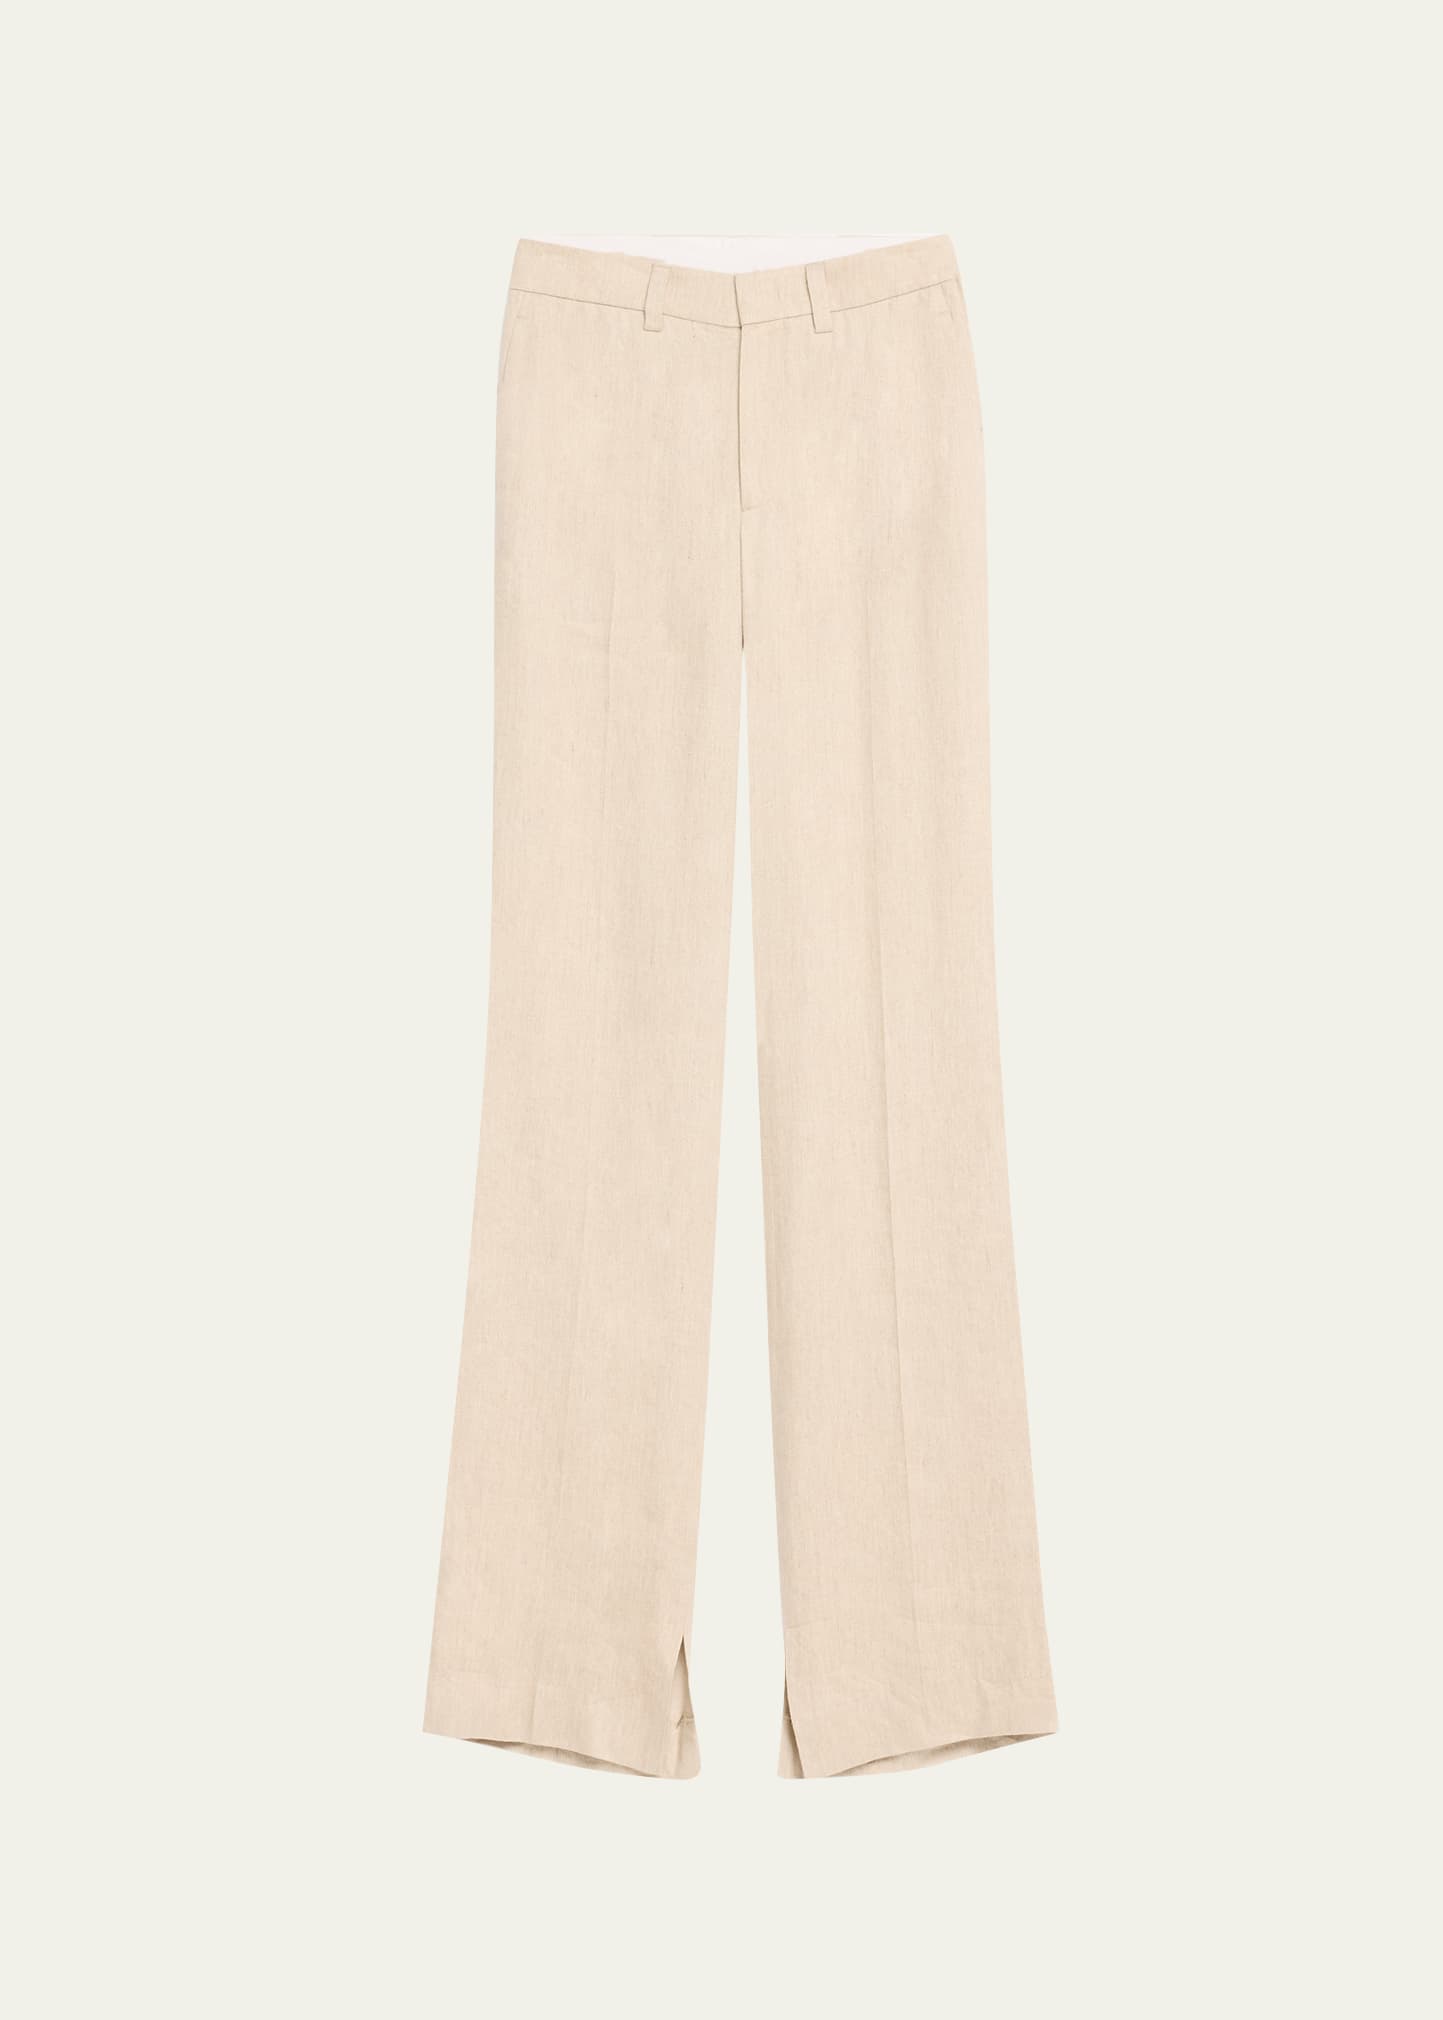 The Cameron Straight Leg Linen Trousers